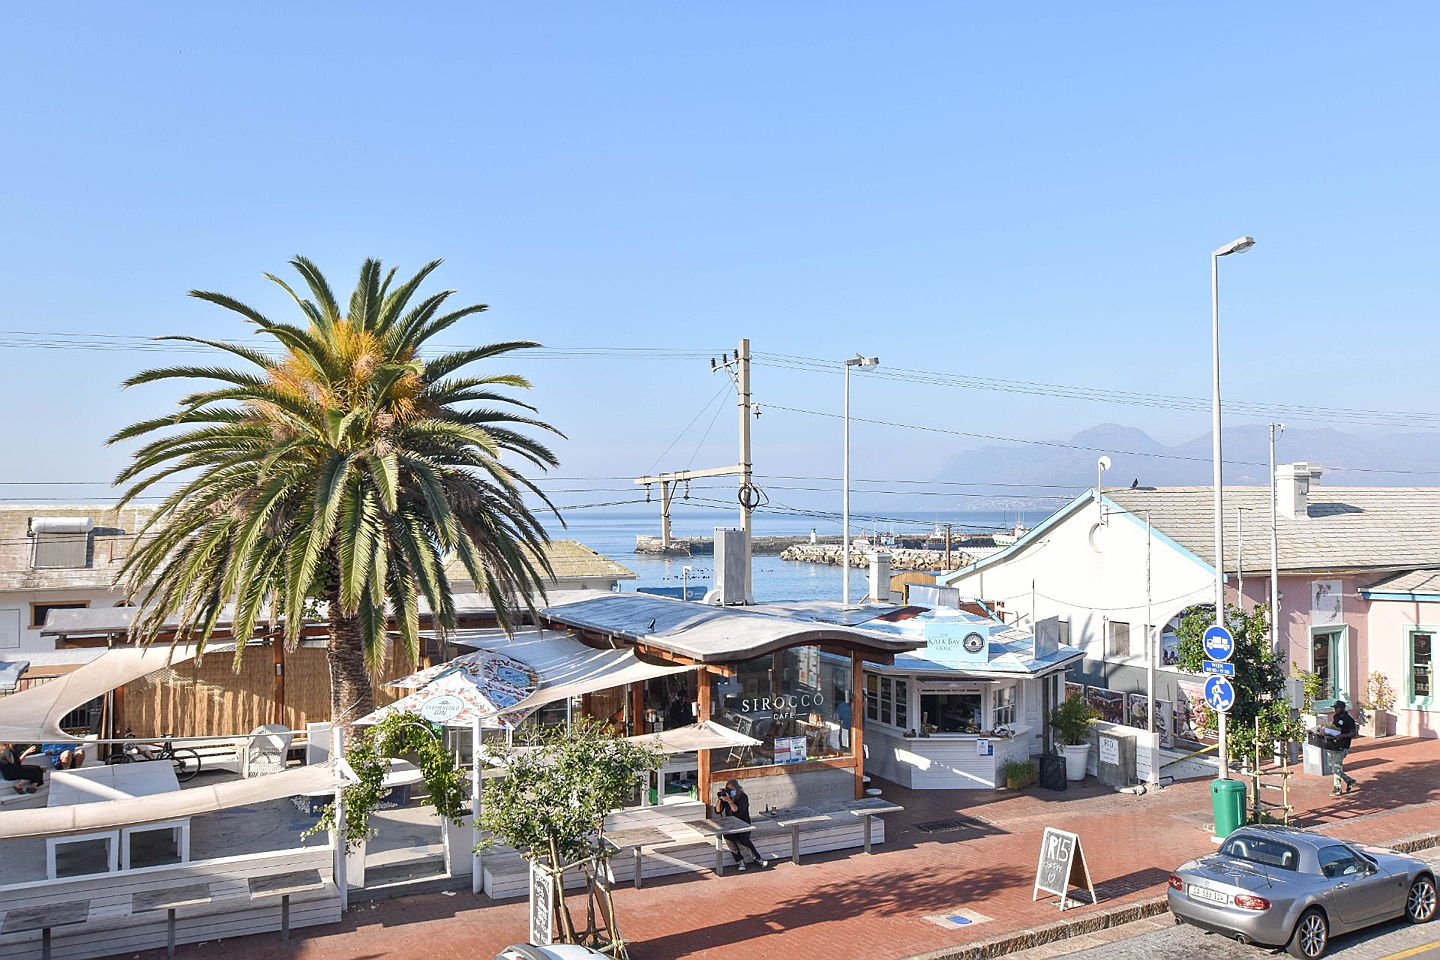  Kalk Bay
- This superb apartment, in the heart of Kalk bay, is situated on the main road giving one a birds eye view of all the action, vibey shops and restaurants and of course the sea. The current owners extensively renovated the property to exceptionally high standards with double glazed aluminium windows, air conditioning, underfloor heating, new floors, electric security shutters, new plumbing and electrics. There are 2 bedrooms, 2 bathrooms, open plan living and dining room and fully fitted kitchen.